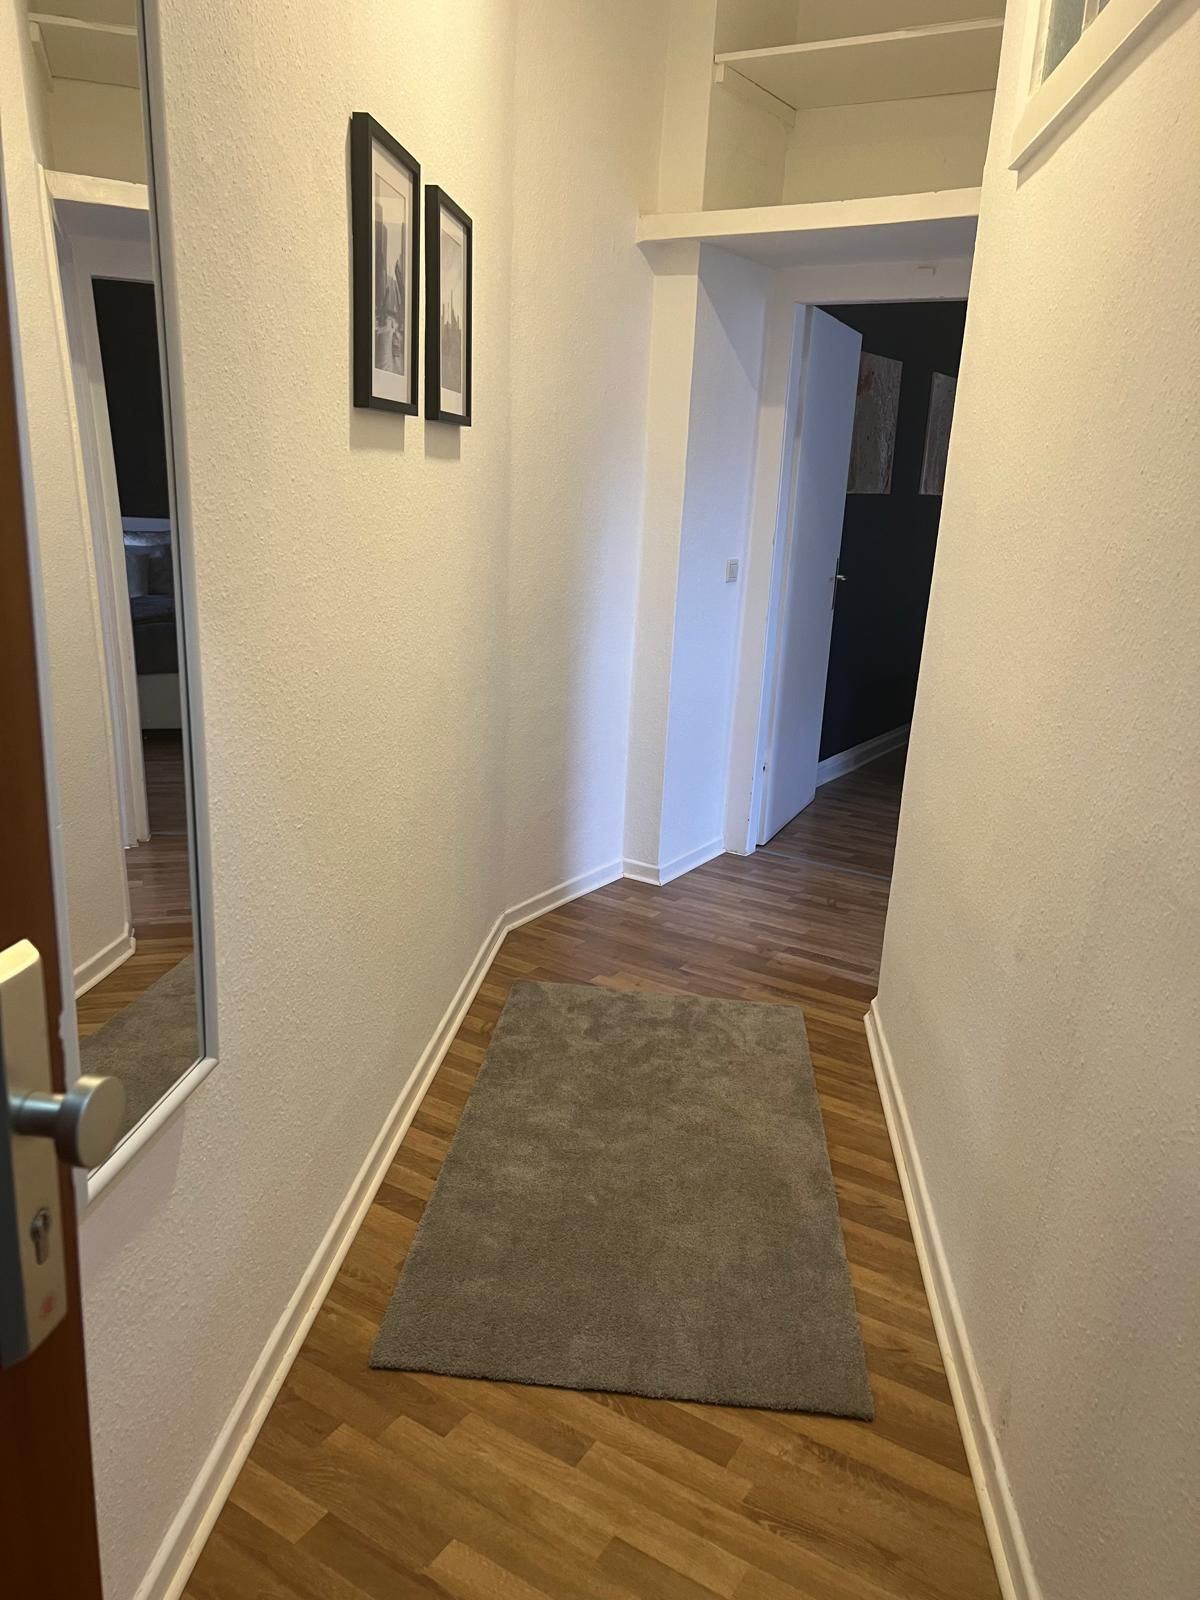 Apartment in the heart of Düsseldorf - 5 minutes to the city center